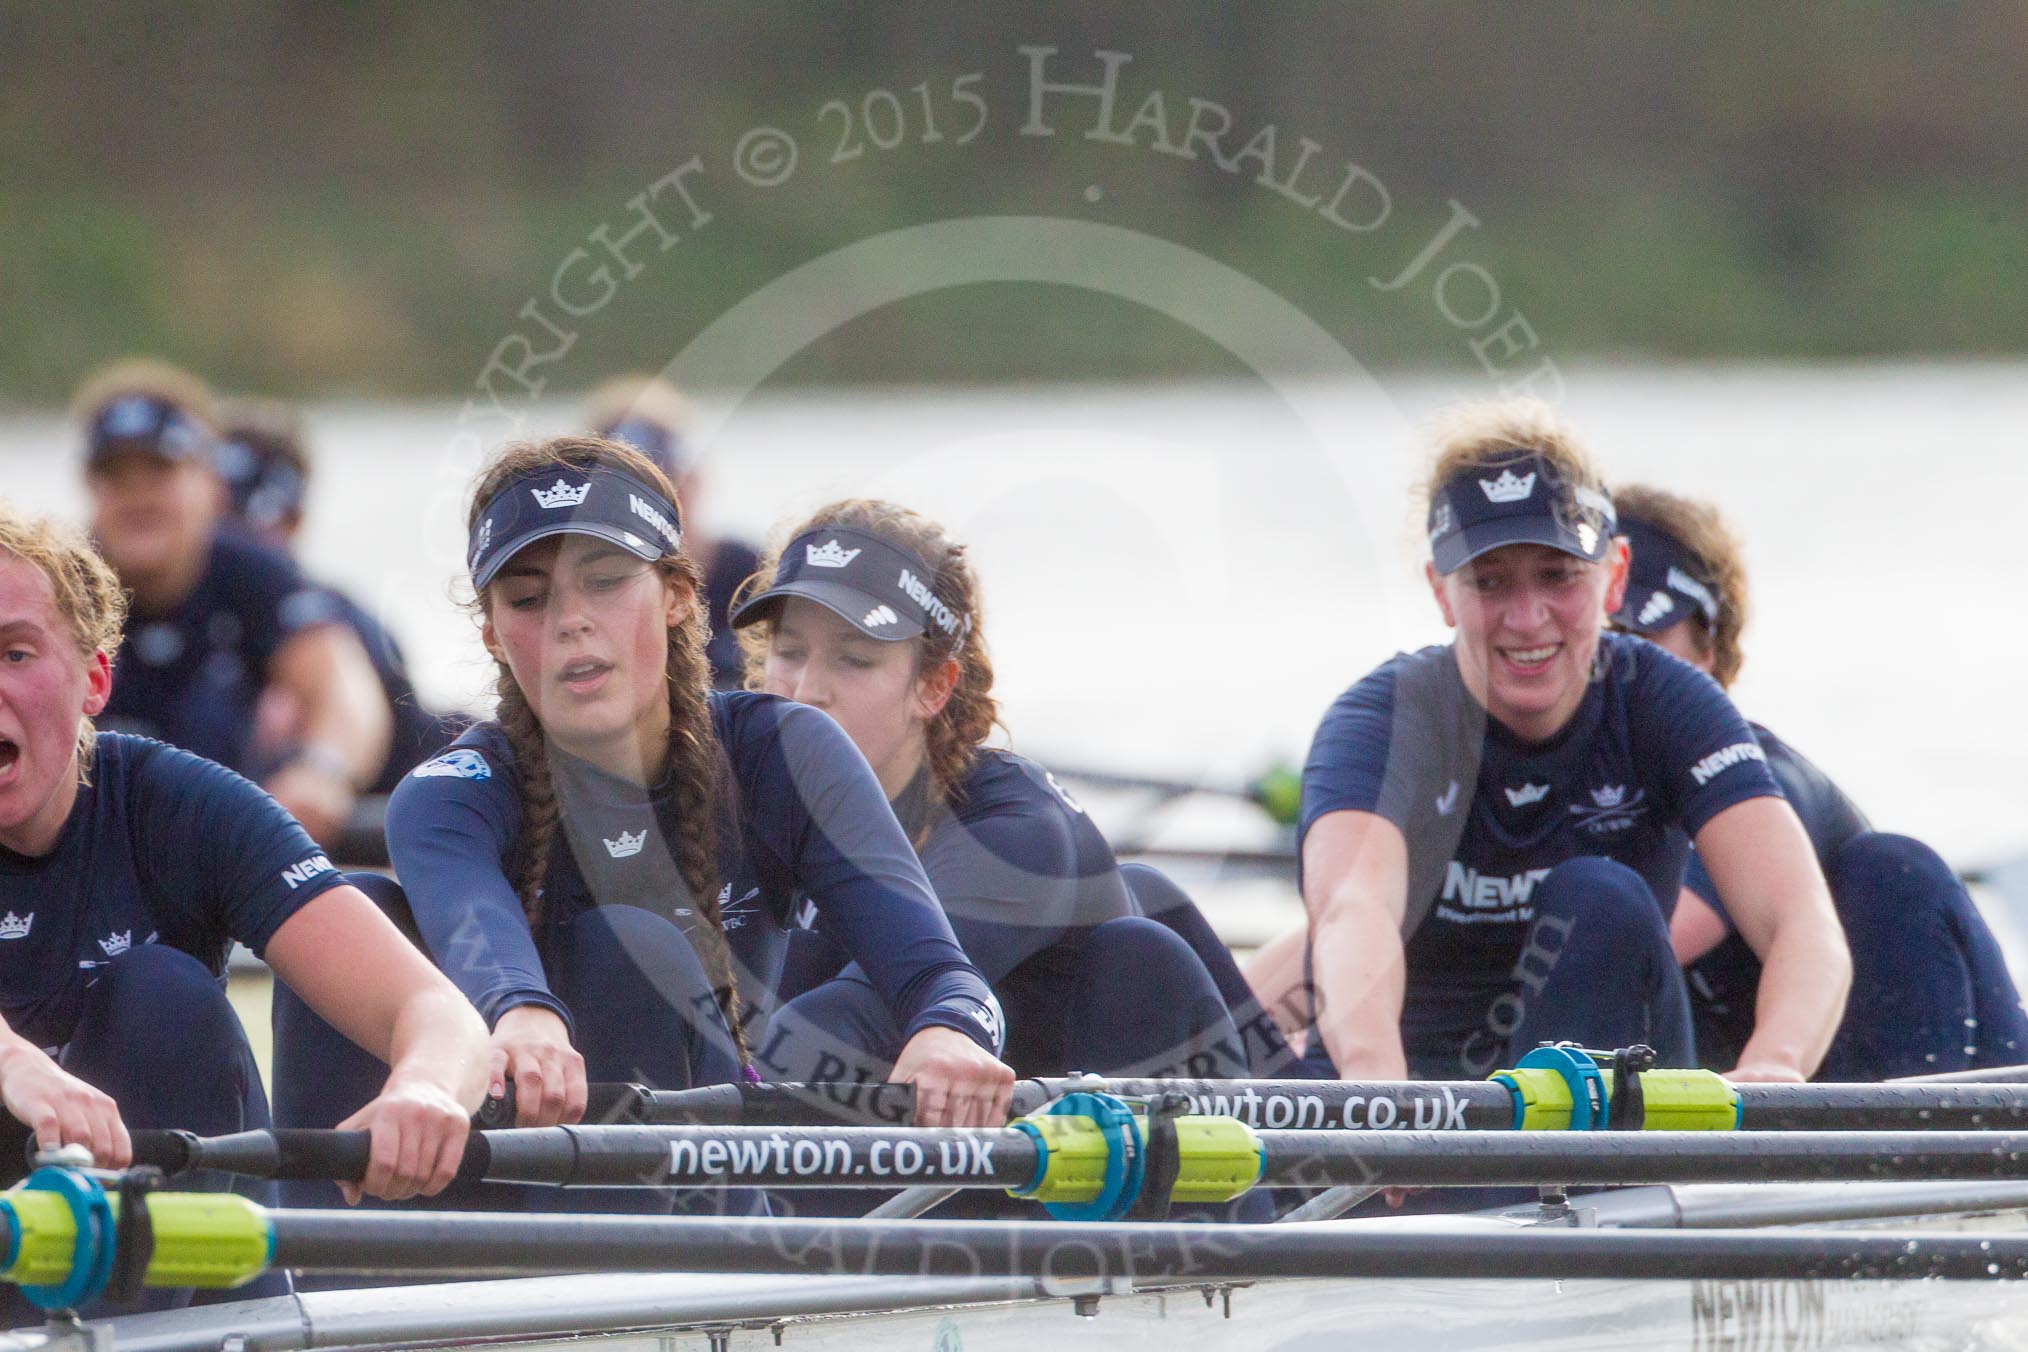 The Boat Race season 2016 - Women's Boat Race Trial Eights (OUWBC, Oxford): "Scylla", here 4-Rebecca Te Water Naude, 3-Elettra Ardissino, 2-Merel Lefferts, bow-Issy Dodds.
River Thames between Putney Bridge and Mortlake,
London SW15,

United Kingdom,
on 10 December 2015 at 12:31, image #263